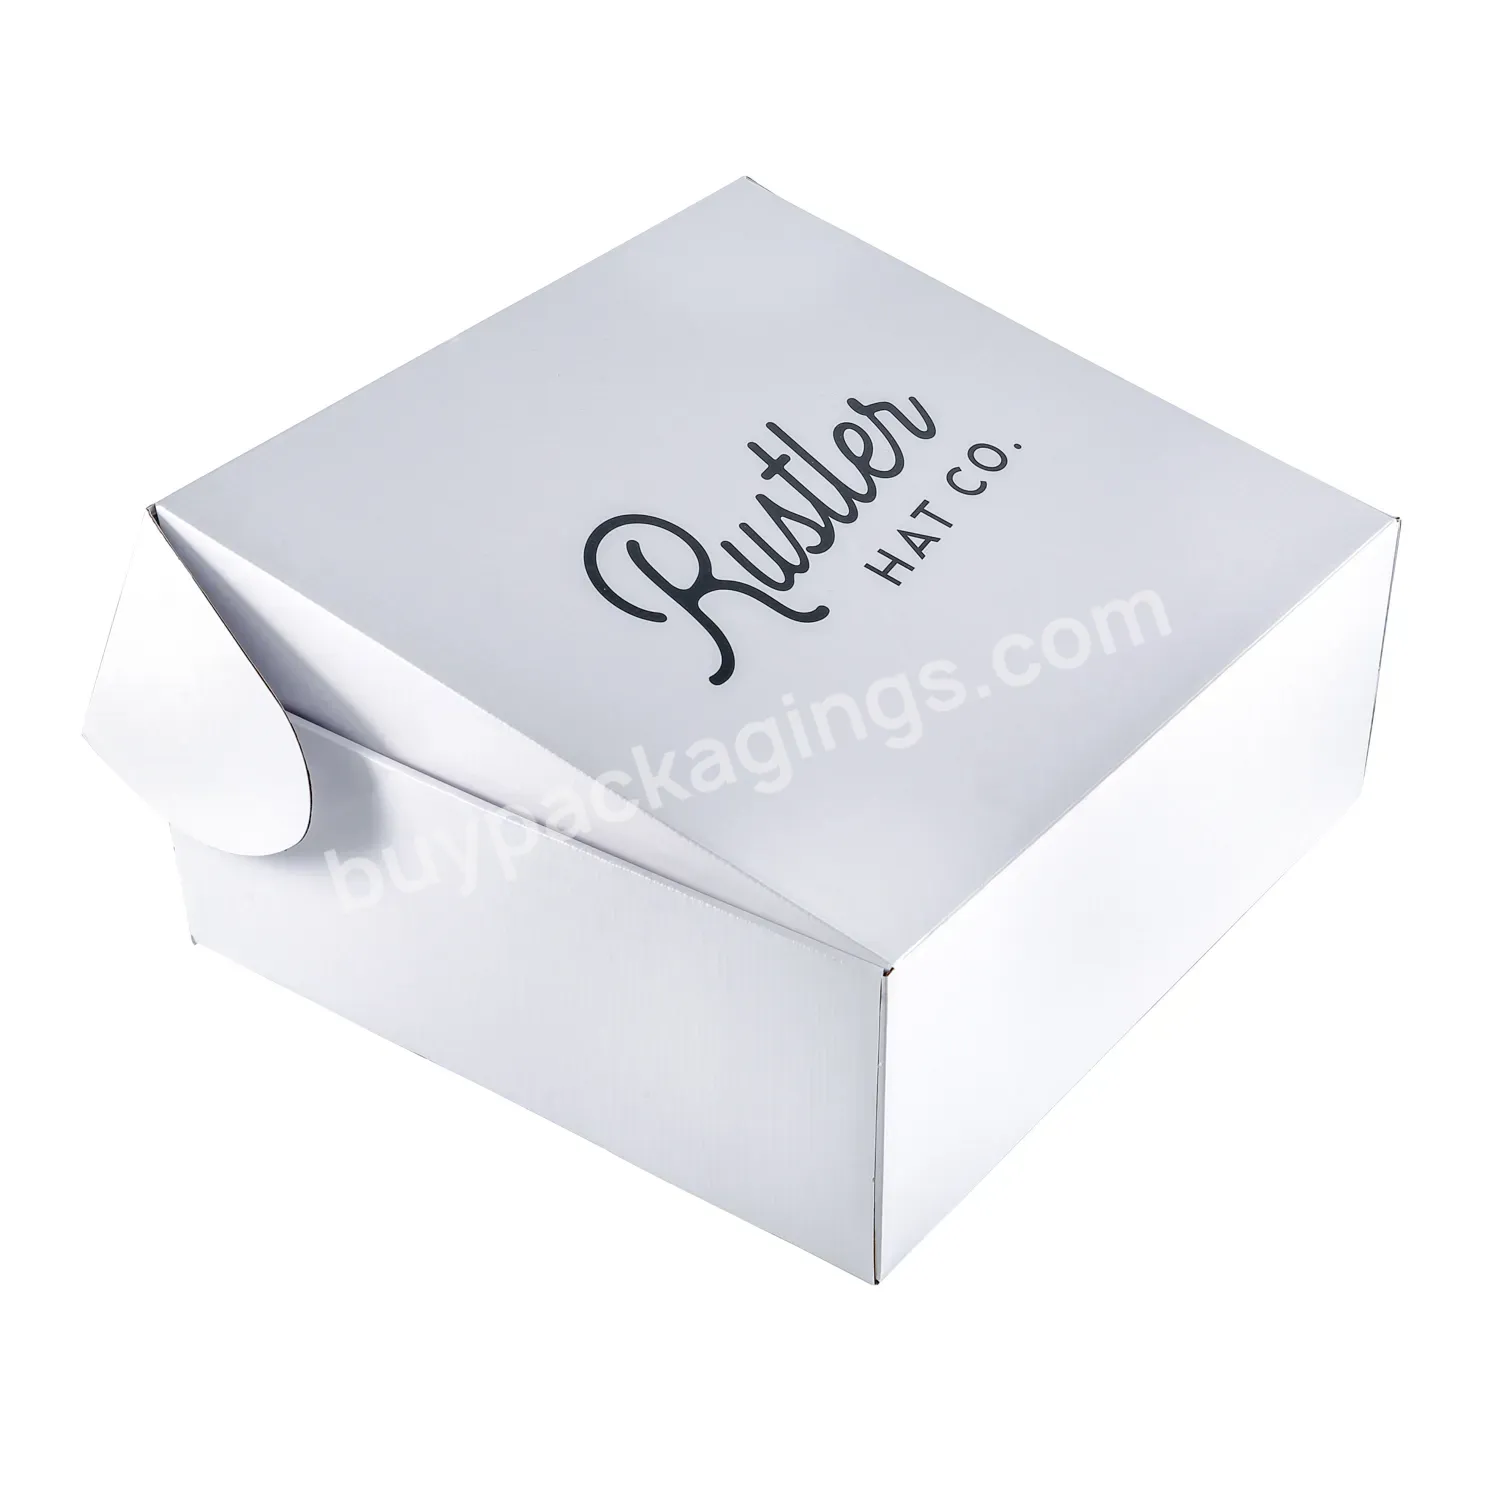 Mailer Box Manufacture Customized Colored Mailer Boxes With Custom Logo Printed,Durable Apparel Packaging Boxes For Hat